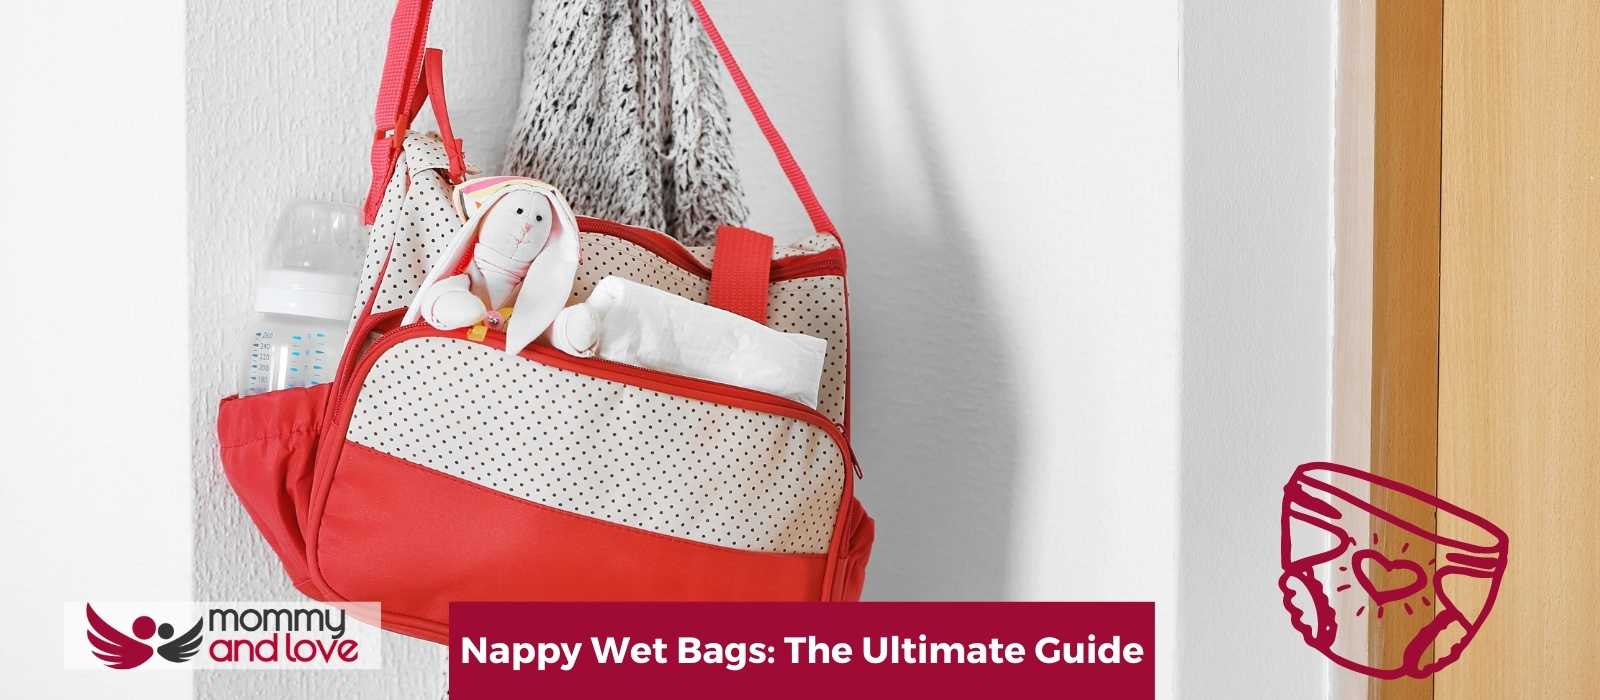 Nappy Wet Bags: The Ultimate Guide